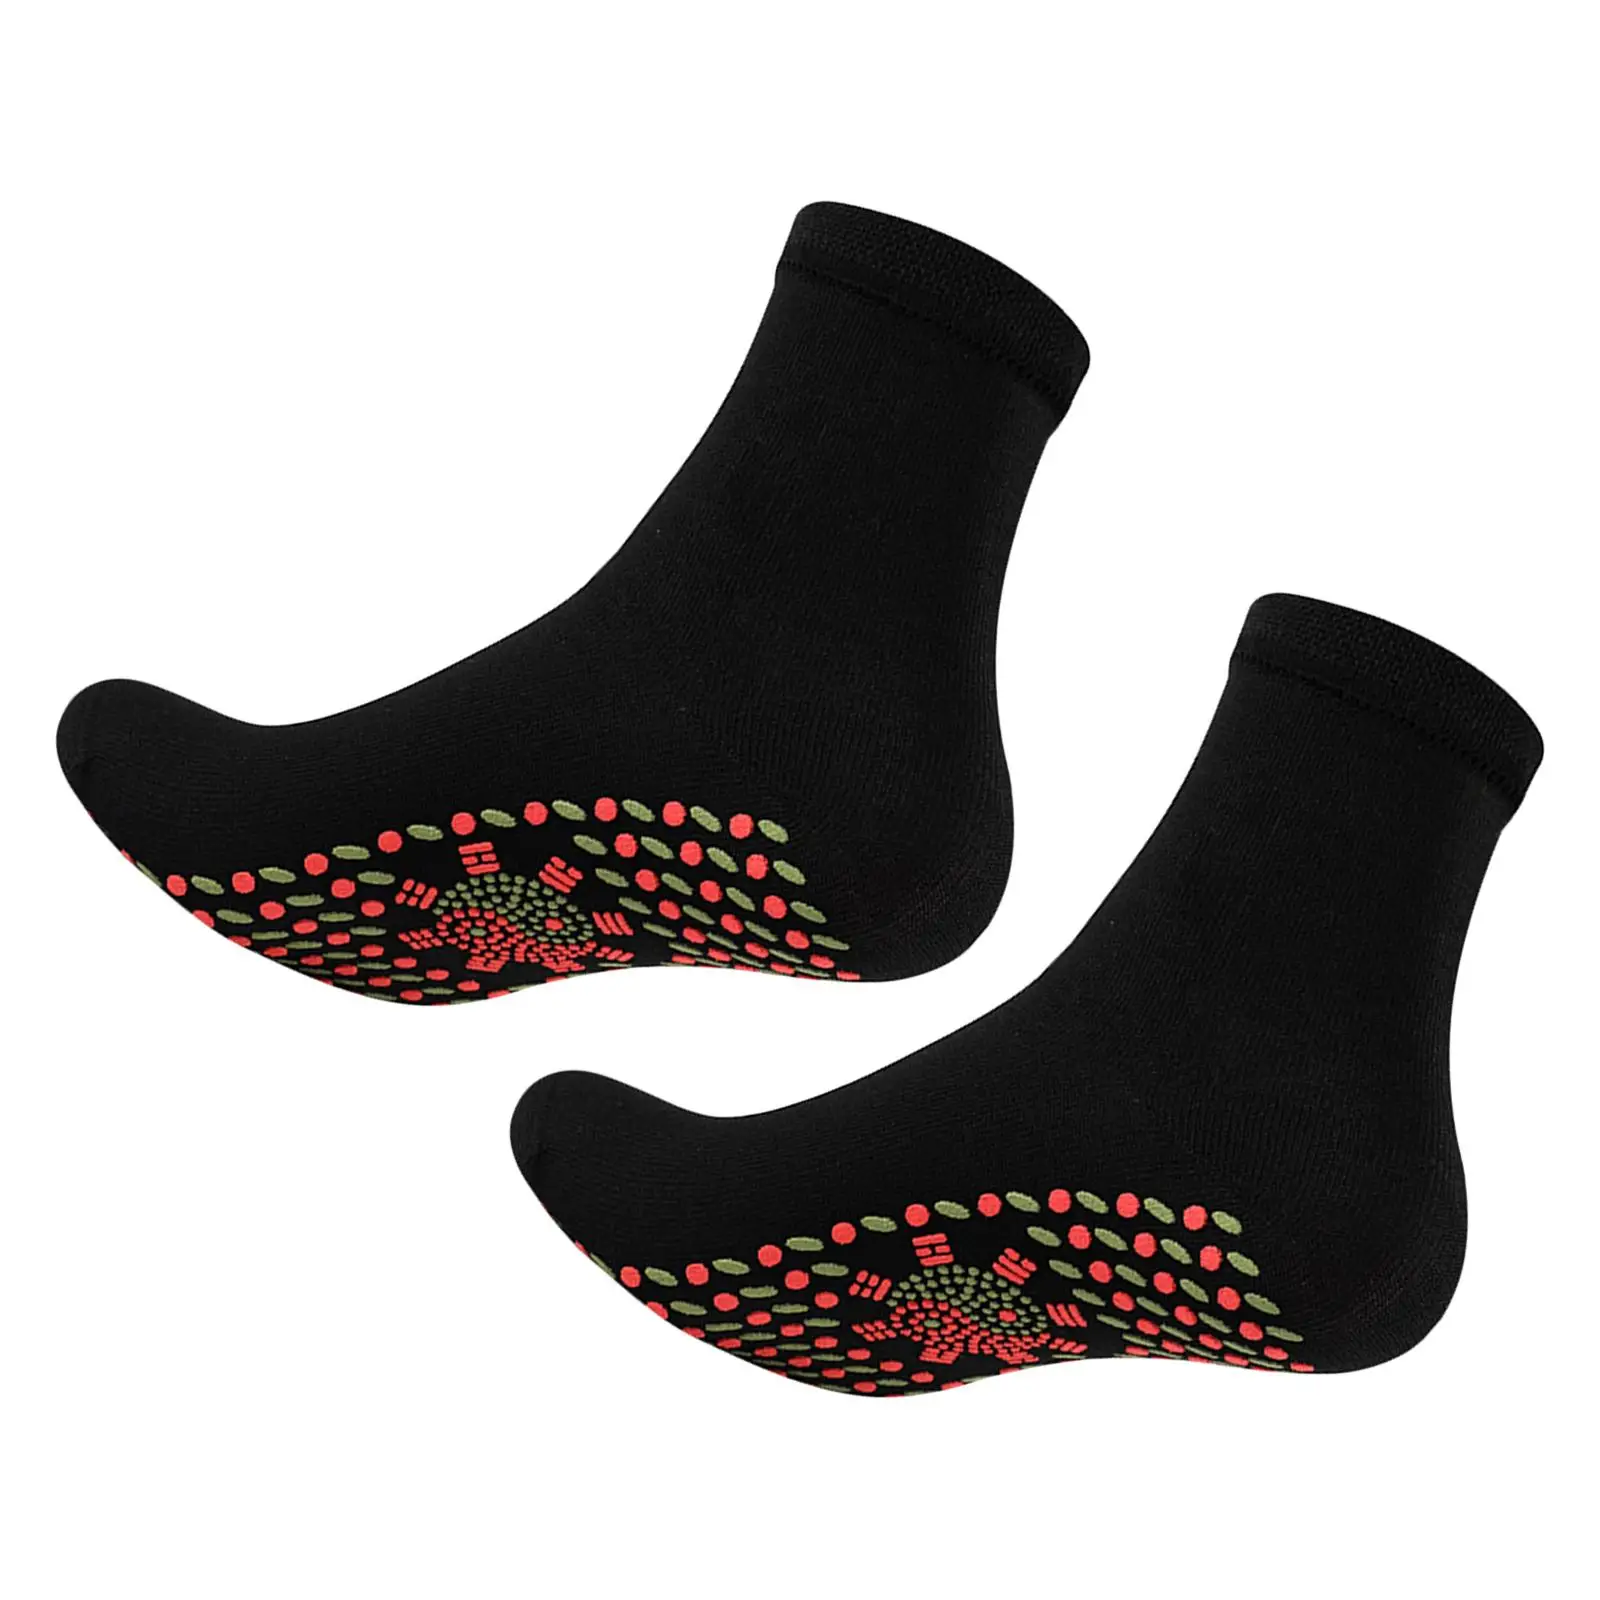 Heated Socks Breathable Cold Resistant Winter Self Heating Socks for Camping